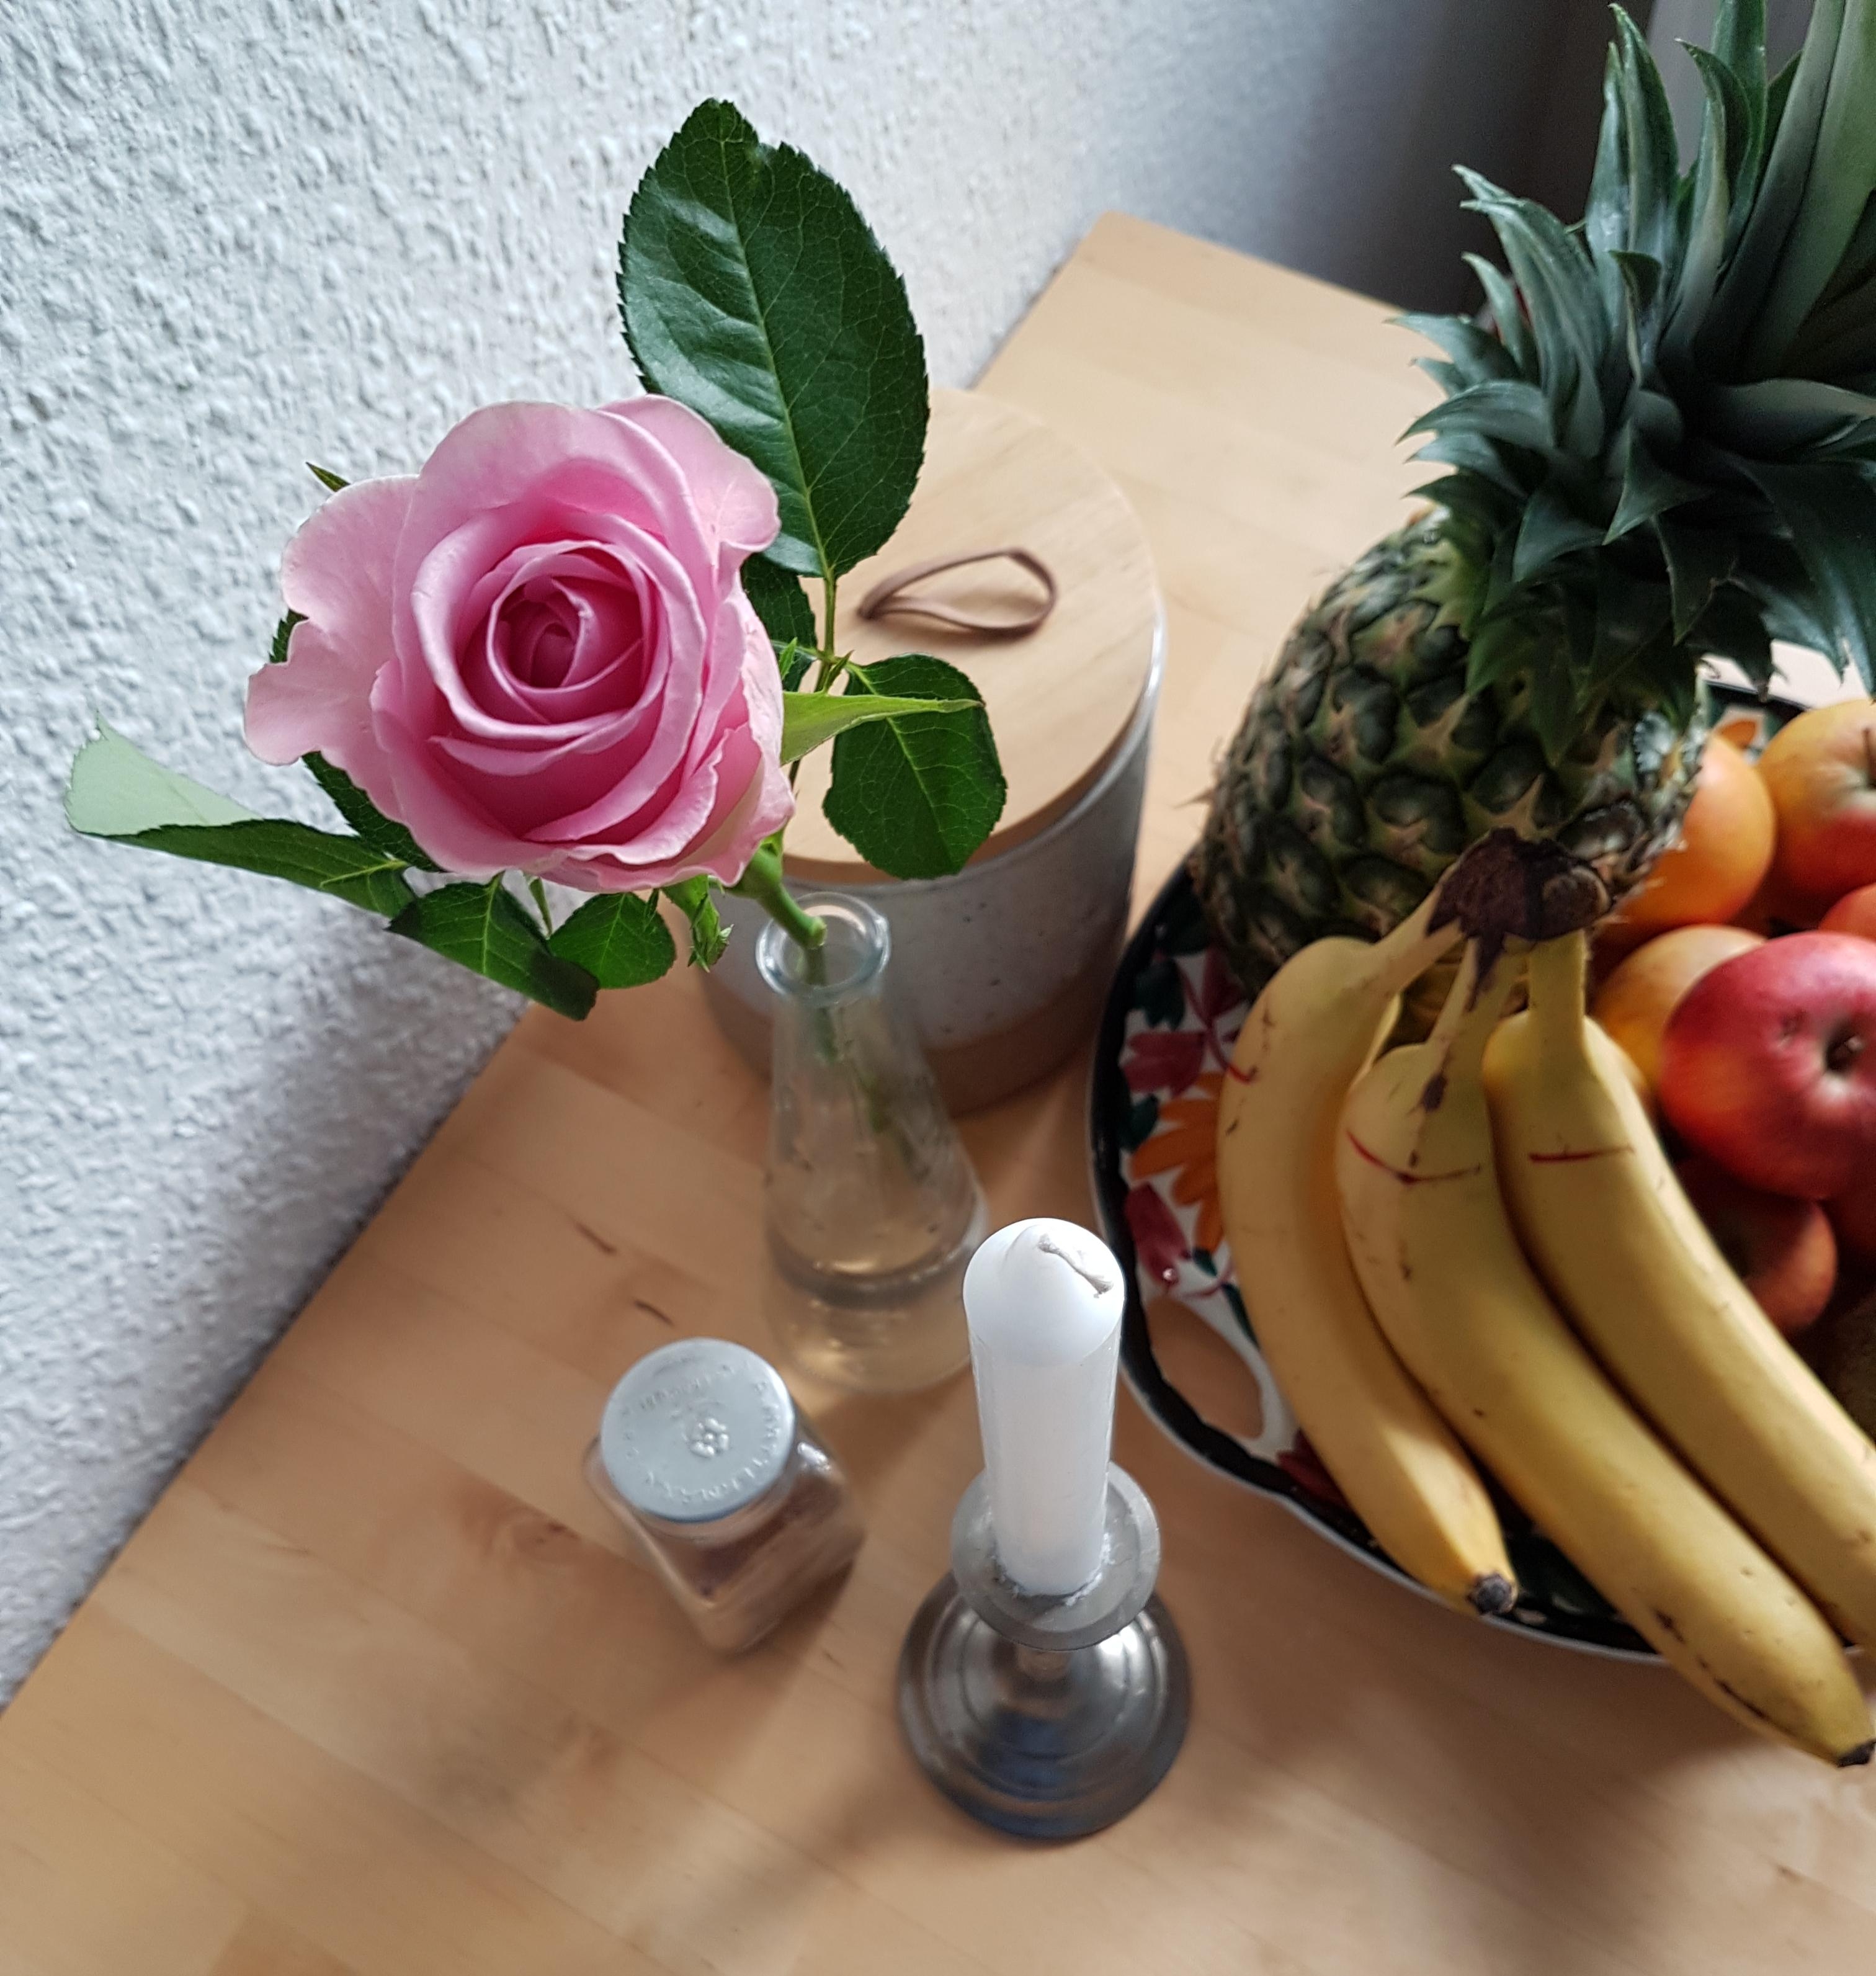 Good morning healthy weekend 💟 me time 

#Wochenende #healthyfood